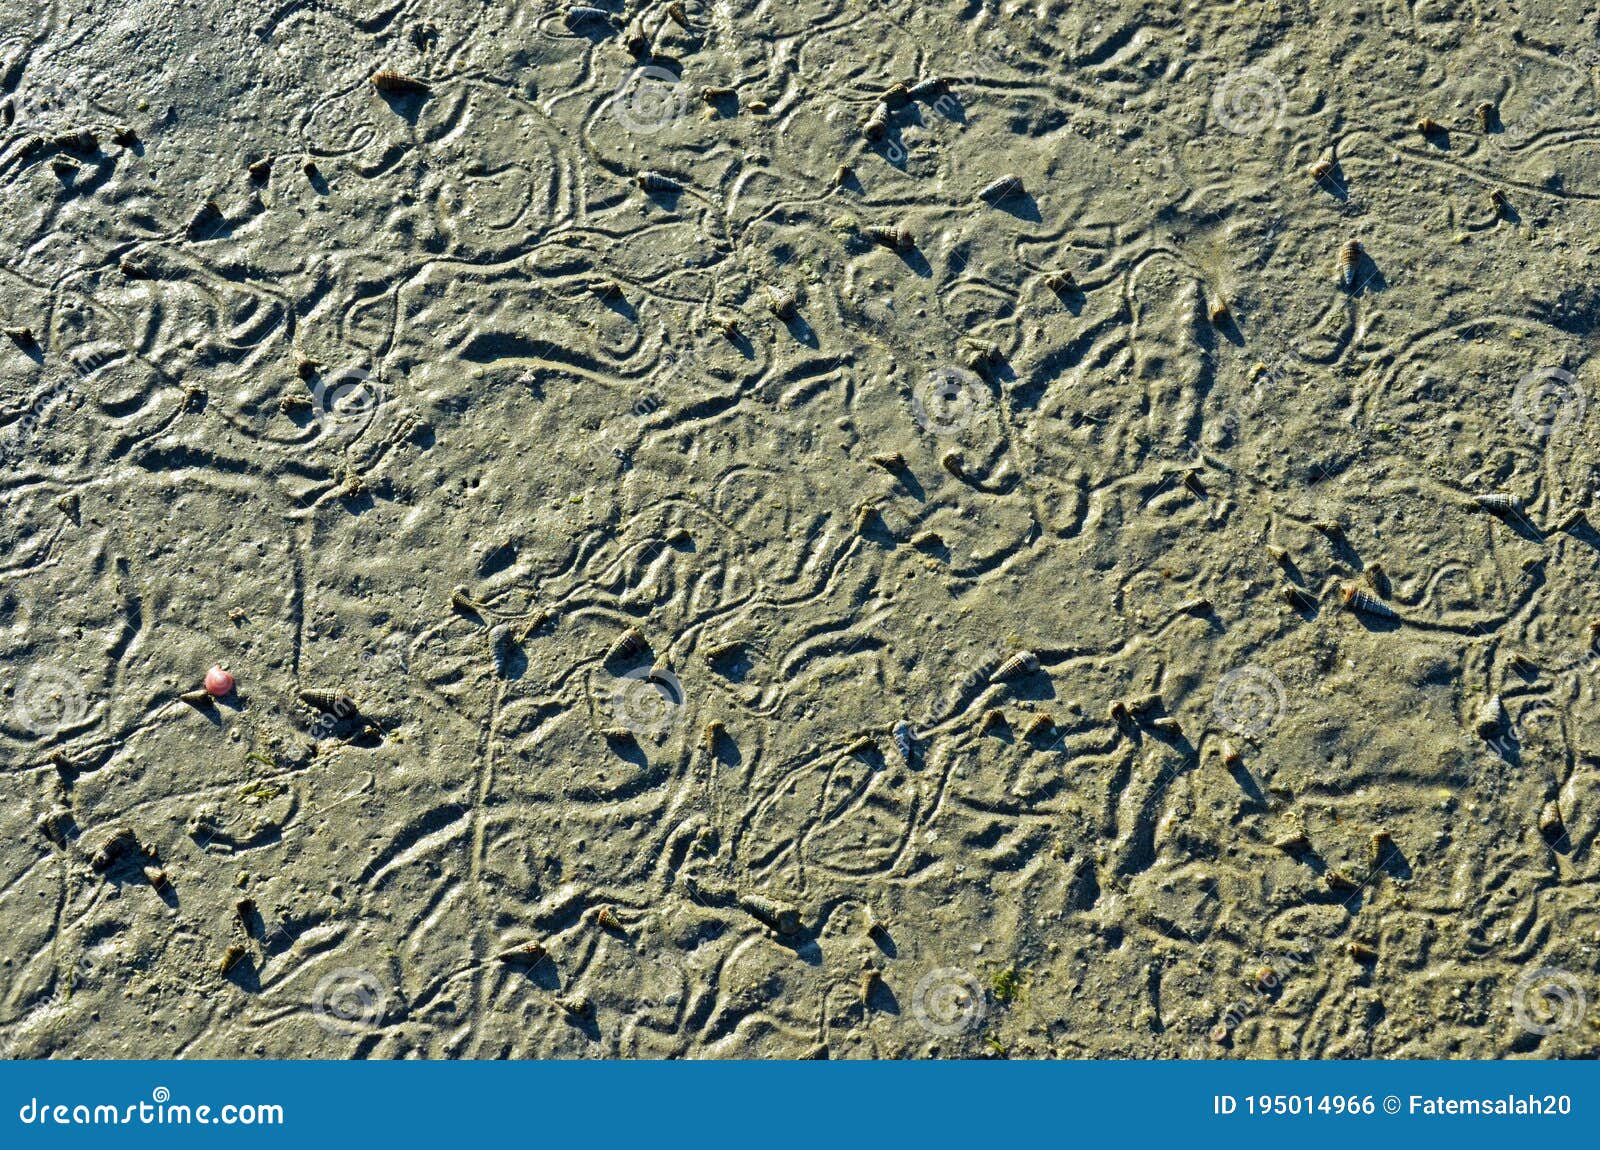 abstract pattern made by mollusc on beach